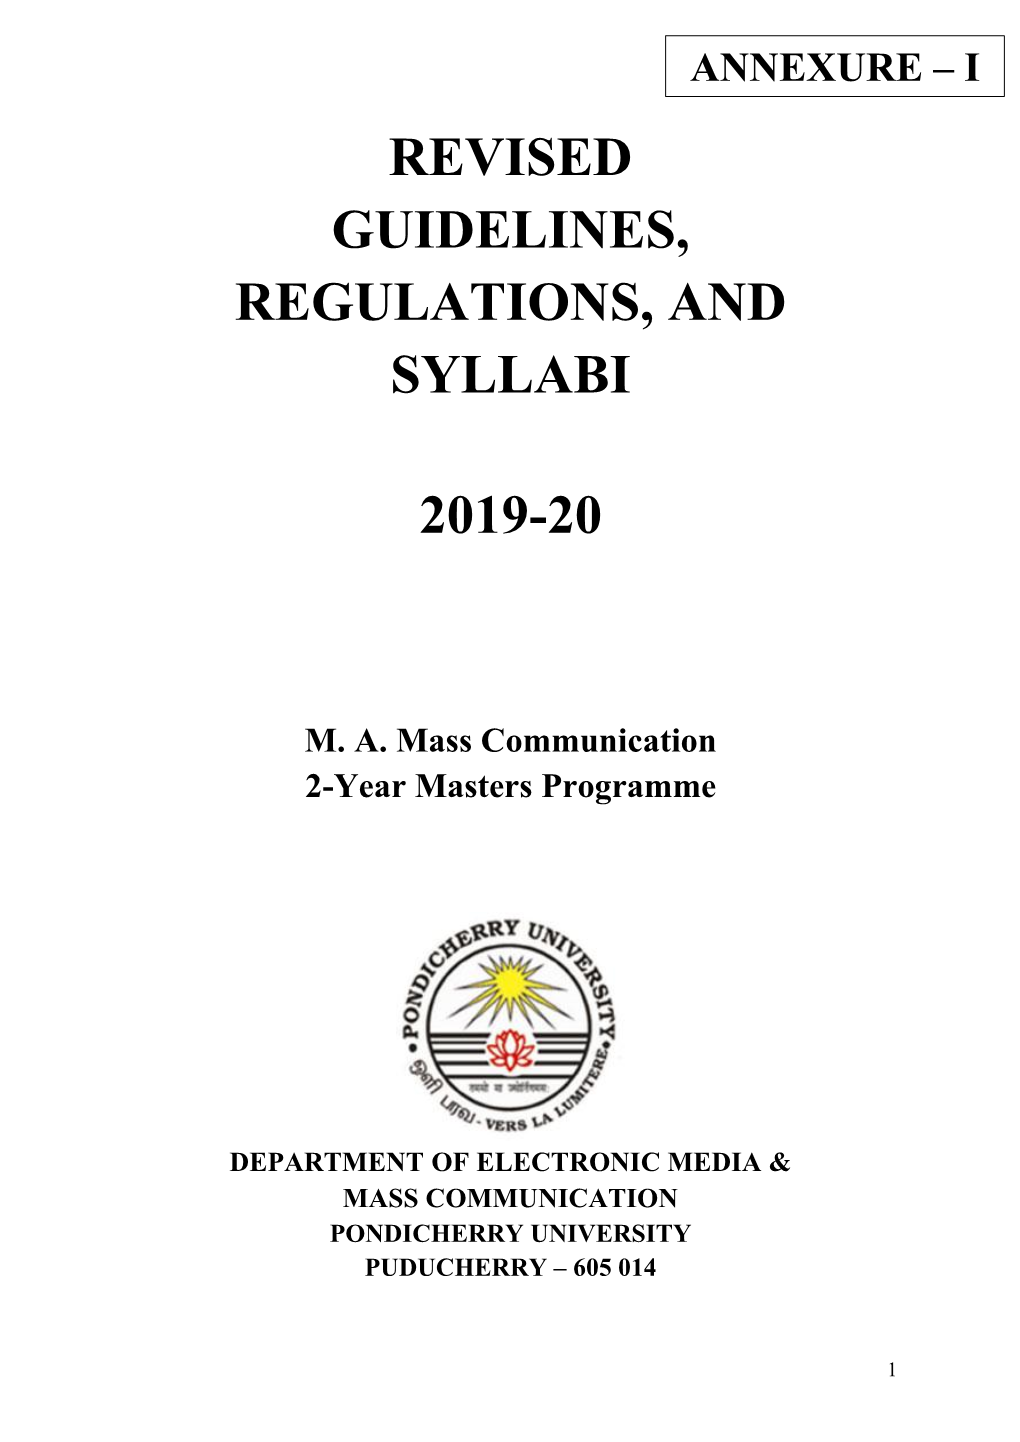 Revised Guidelines, Regulations, and Syllabi